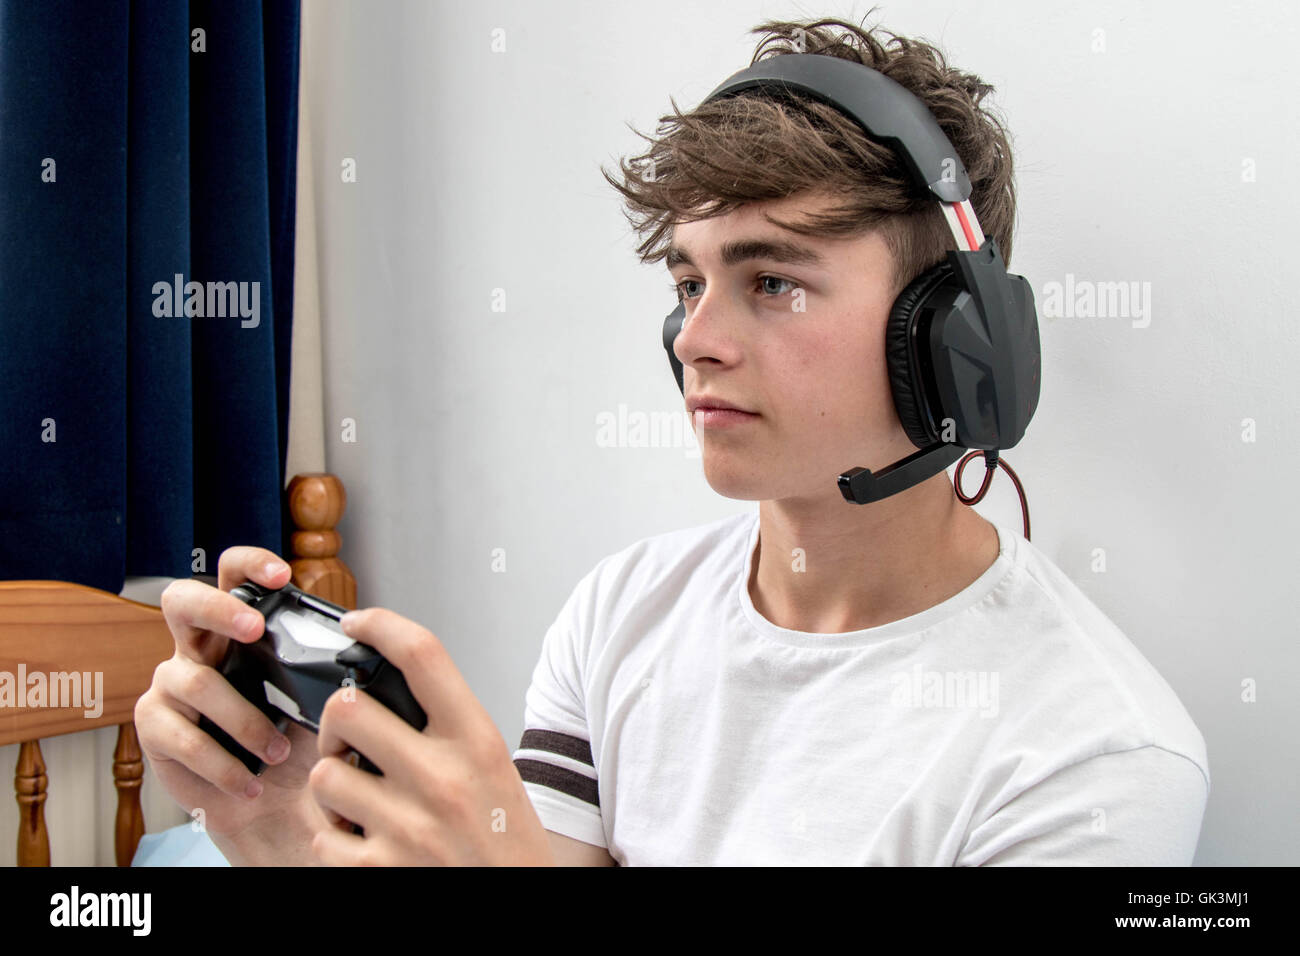 Teenage boy playing a video game Stock Photo